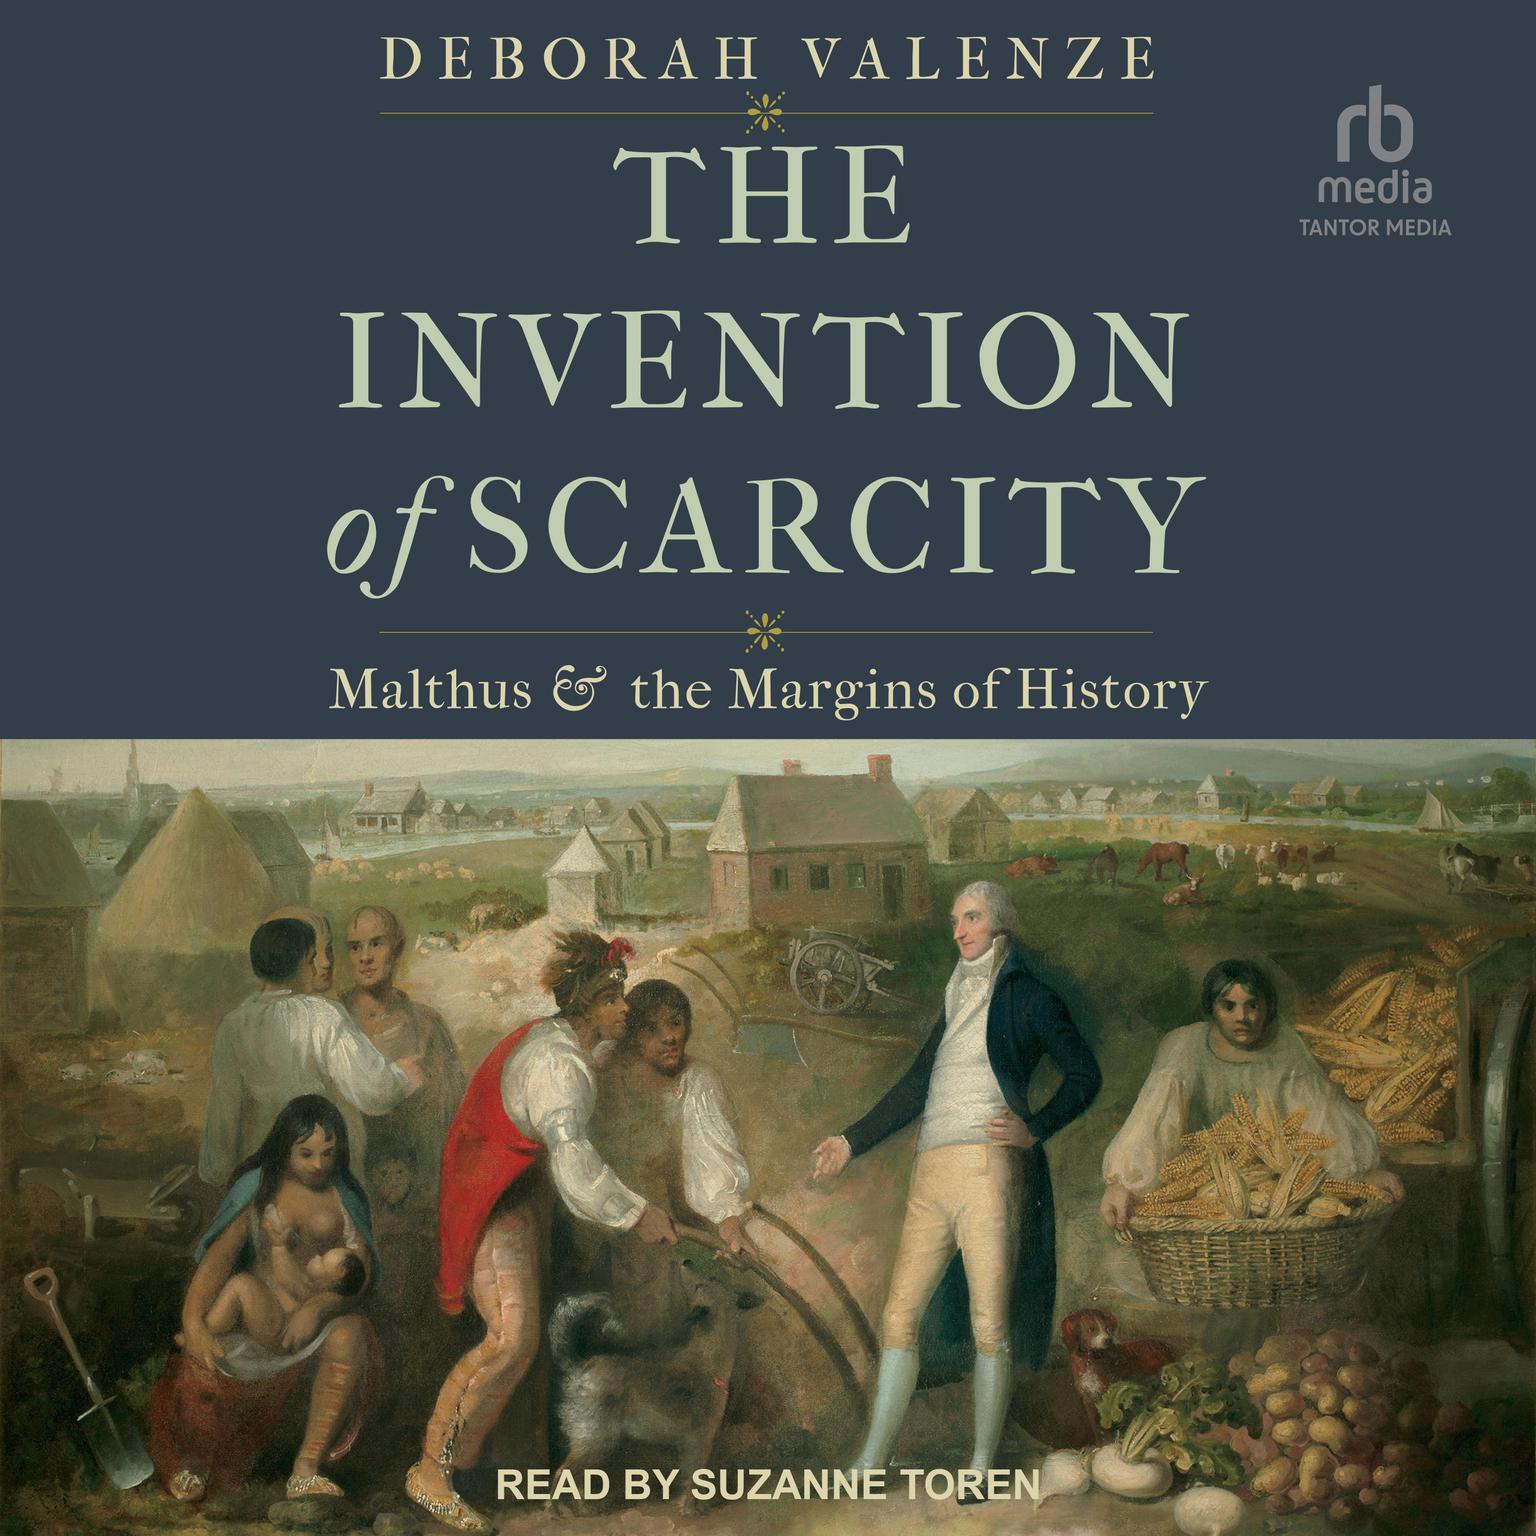 The Invention of Scarcity: Malthus and the Margins of History Audiobook, by Deborah Valenze